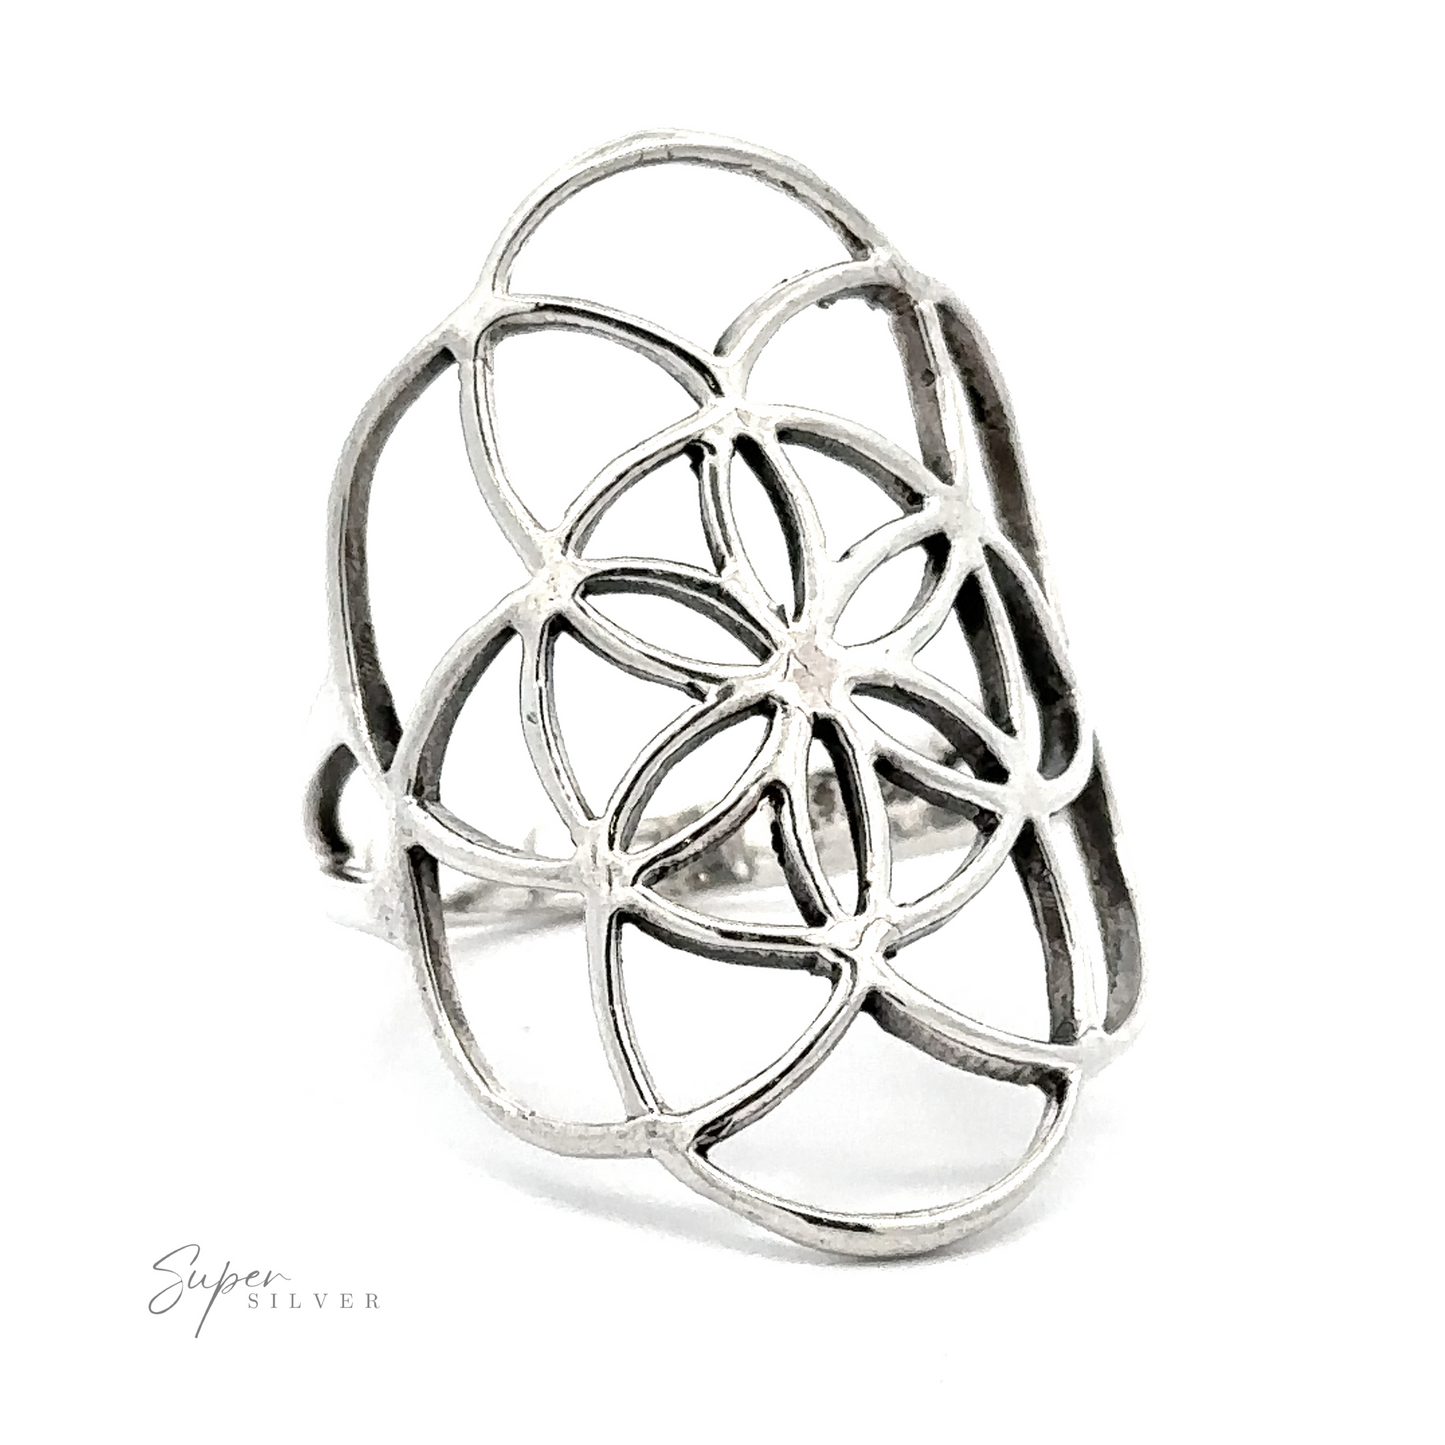 A Silver Flower of Life ring featuring an intricate, openwork design of interlacing loops, displayed on a white background with a "super silver" watermark.